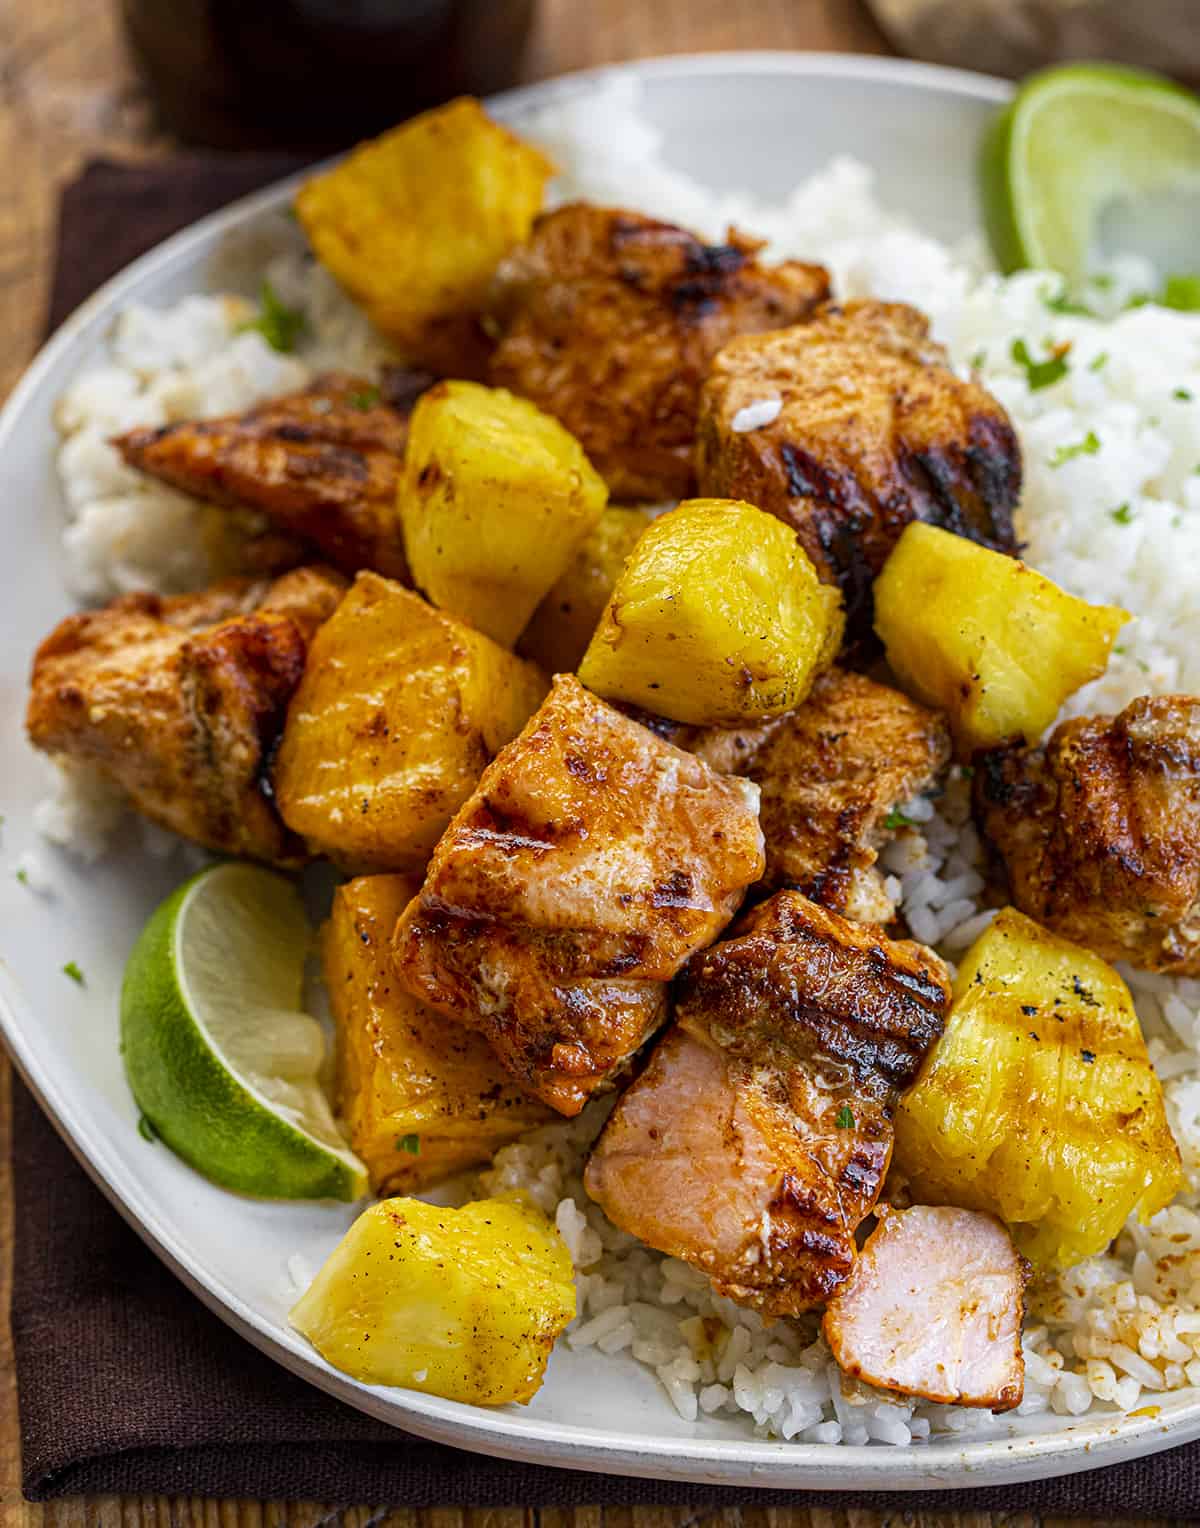 Salmon and Pineapple Kebabs off the Skewer on a Plate with Rice. Dinner, Kebabs, Salmon Kebabs, Pineapple Kebabs, Grilling, Air Fryer Kebabs, Oven Kebabs, Seafood Kebabs, Summer Kebabs, How to Make Kebobs, recipes, i am homesteader, iamhomesteader